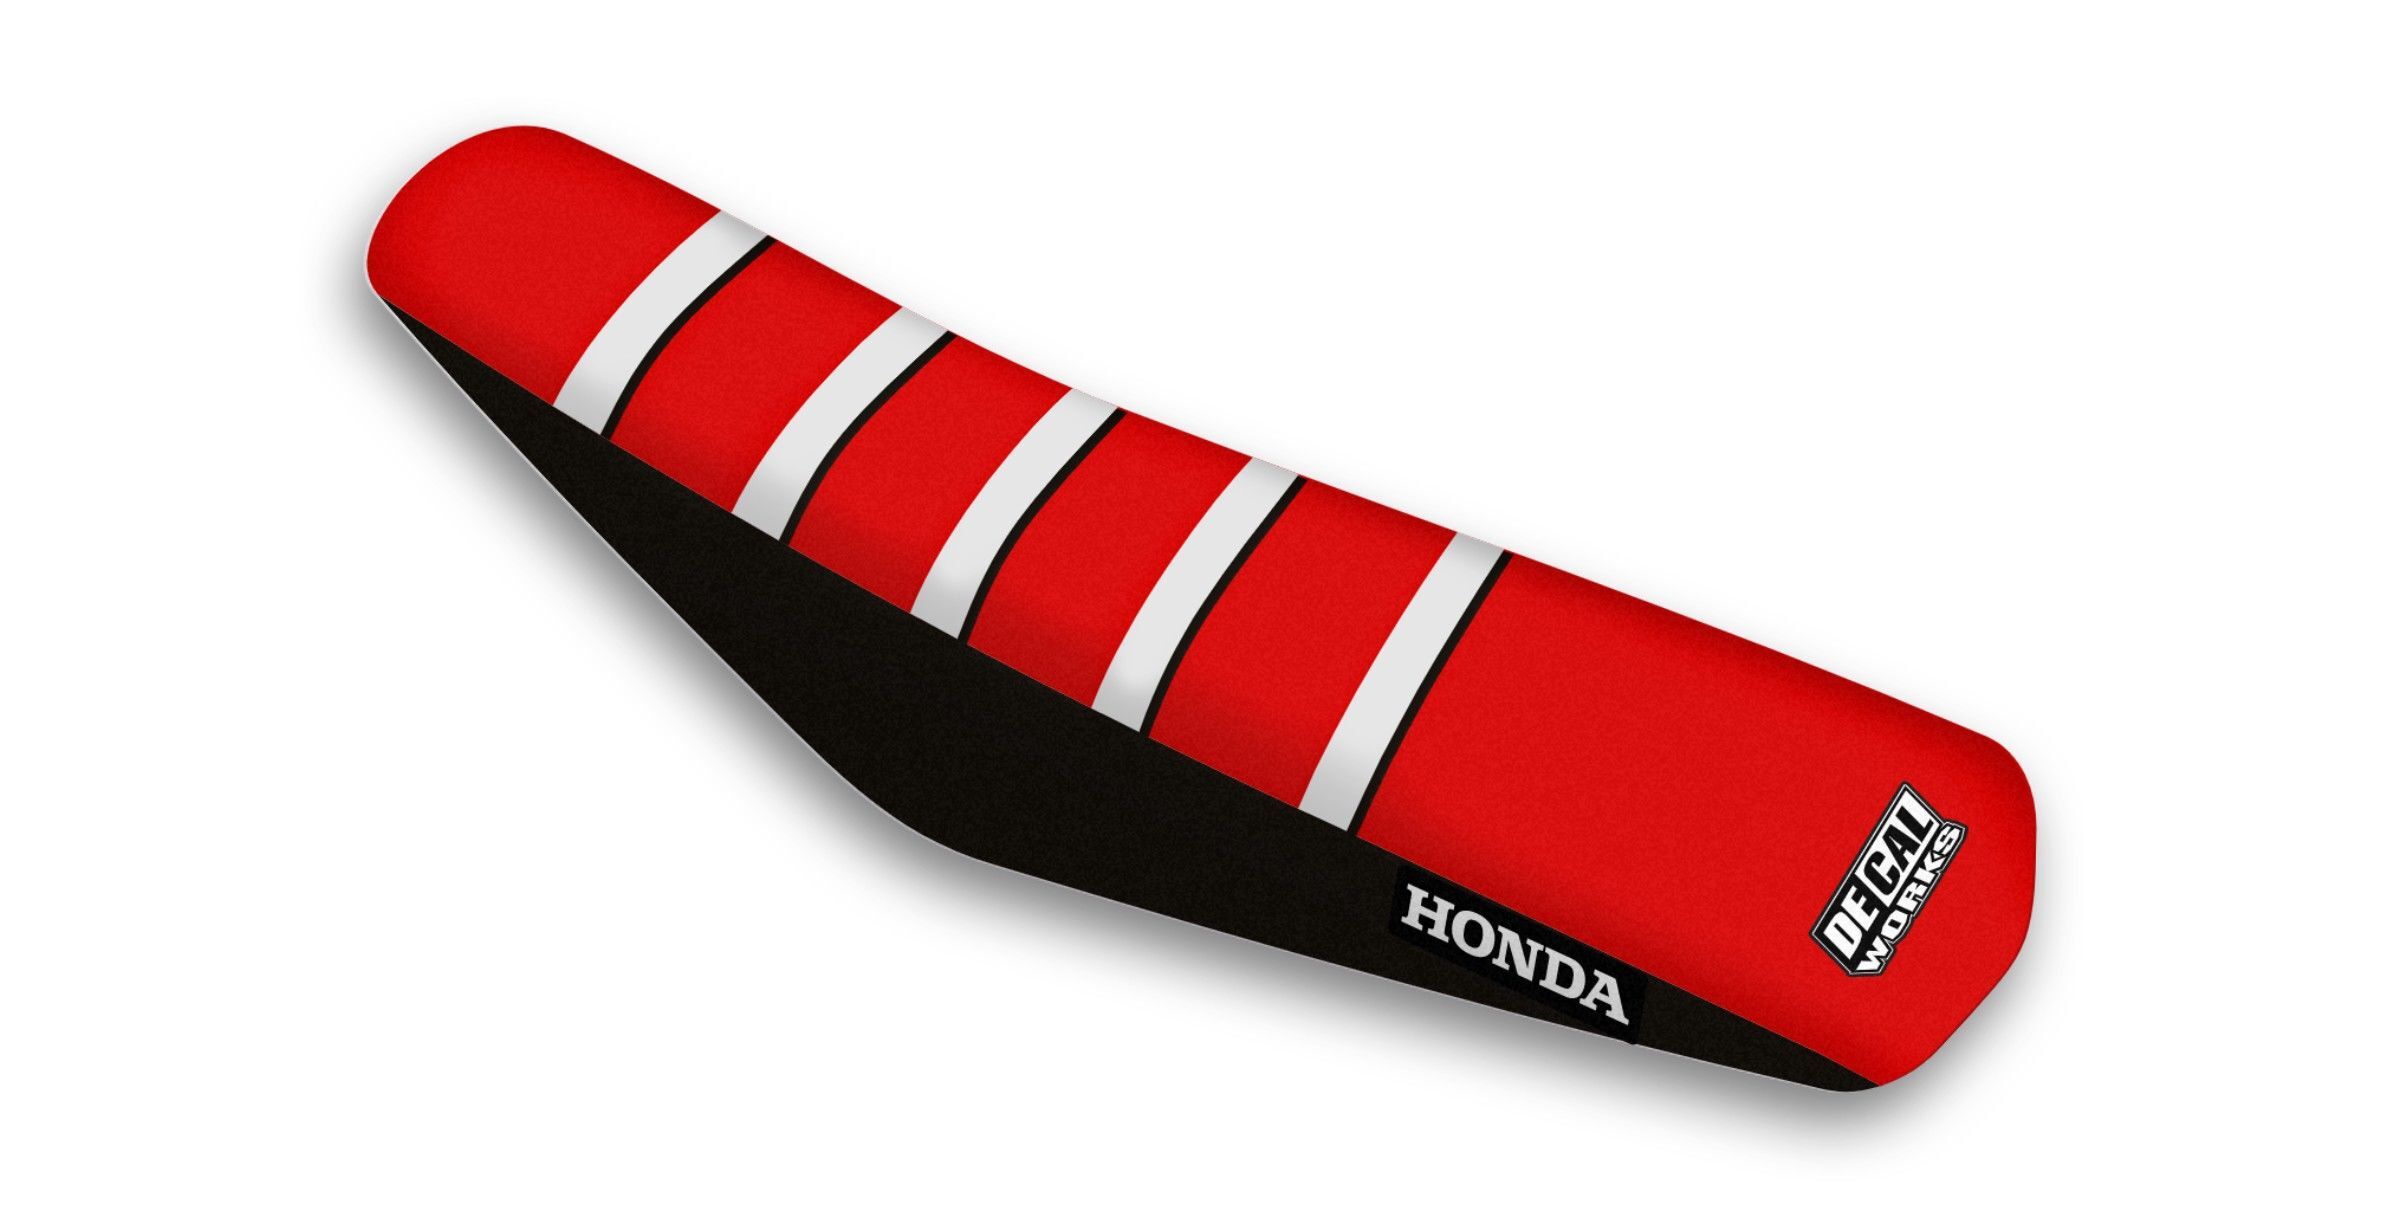 CYCLE WORKS Seat Covers for HONDA